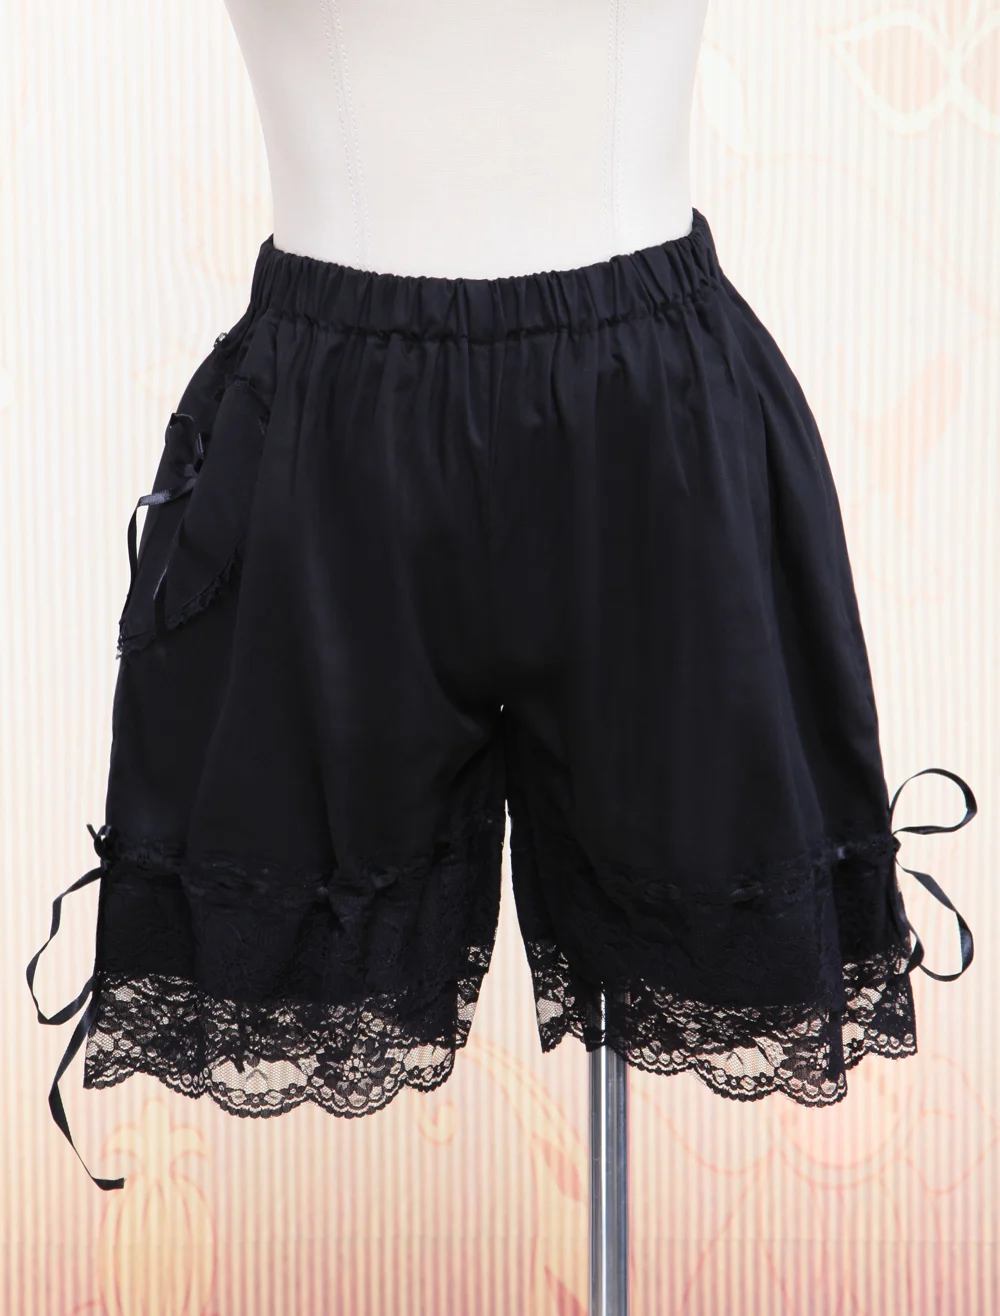 Gothic Black Cotton Lolita Bloomers Lace Trim Ribbons